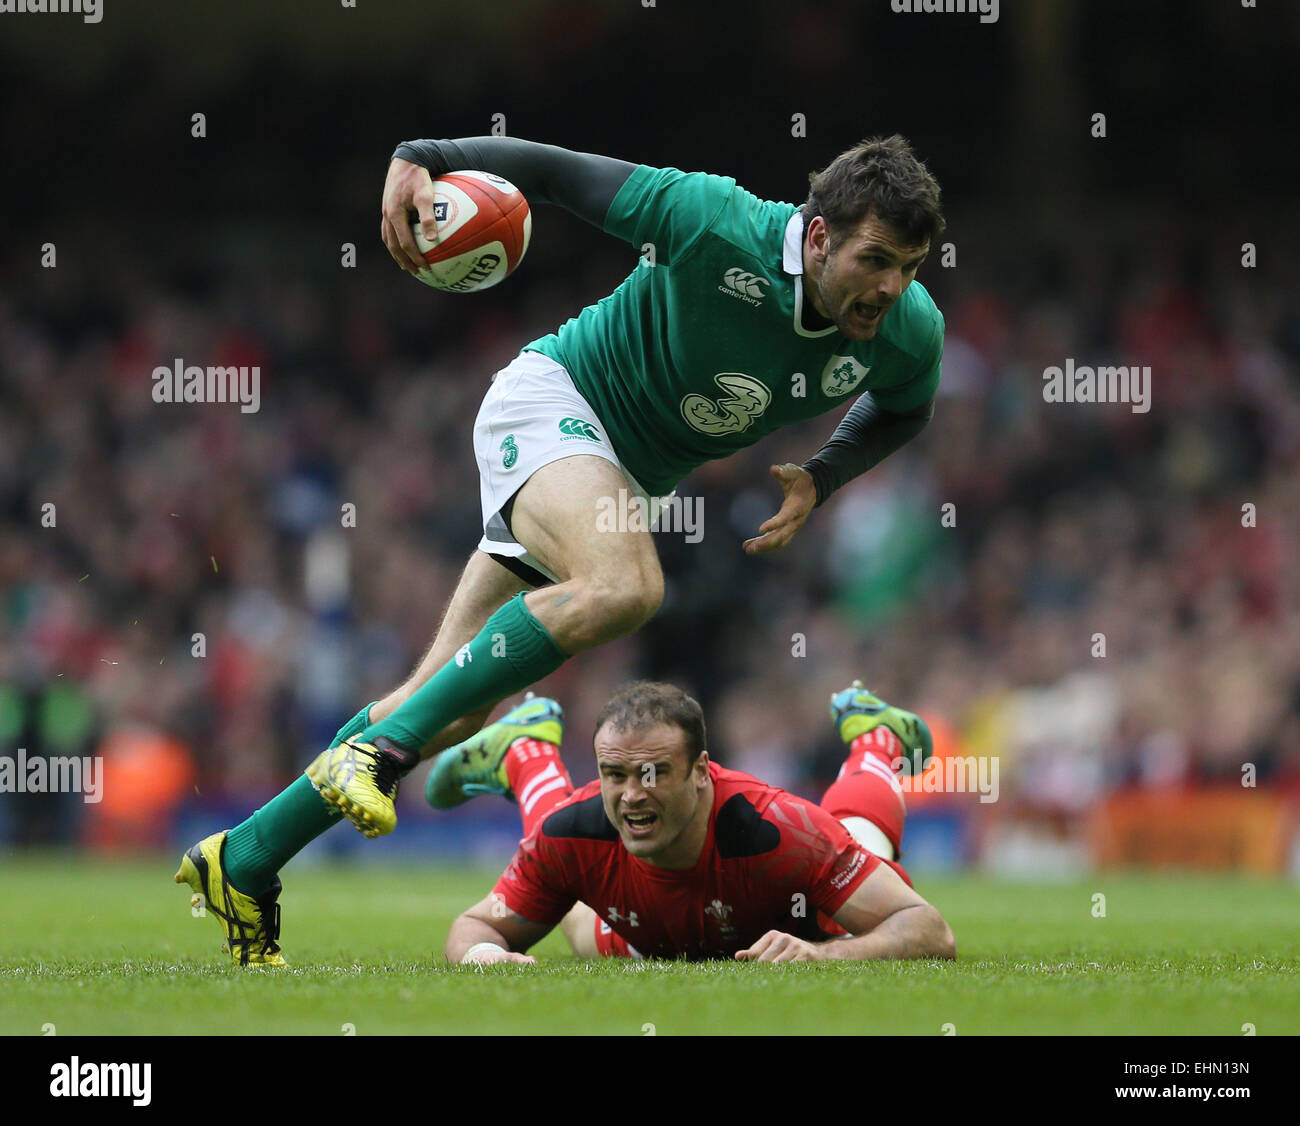 March 14, 2015 - Cardiff, United Kingdom - Jared Payne of Ireland escapes Jamie Roberts of Wales - RBS 6 Nations - Wales vs Ireland - Millennium Stadium - Cardiff - Wales - 14th March 2015 Stock Photo